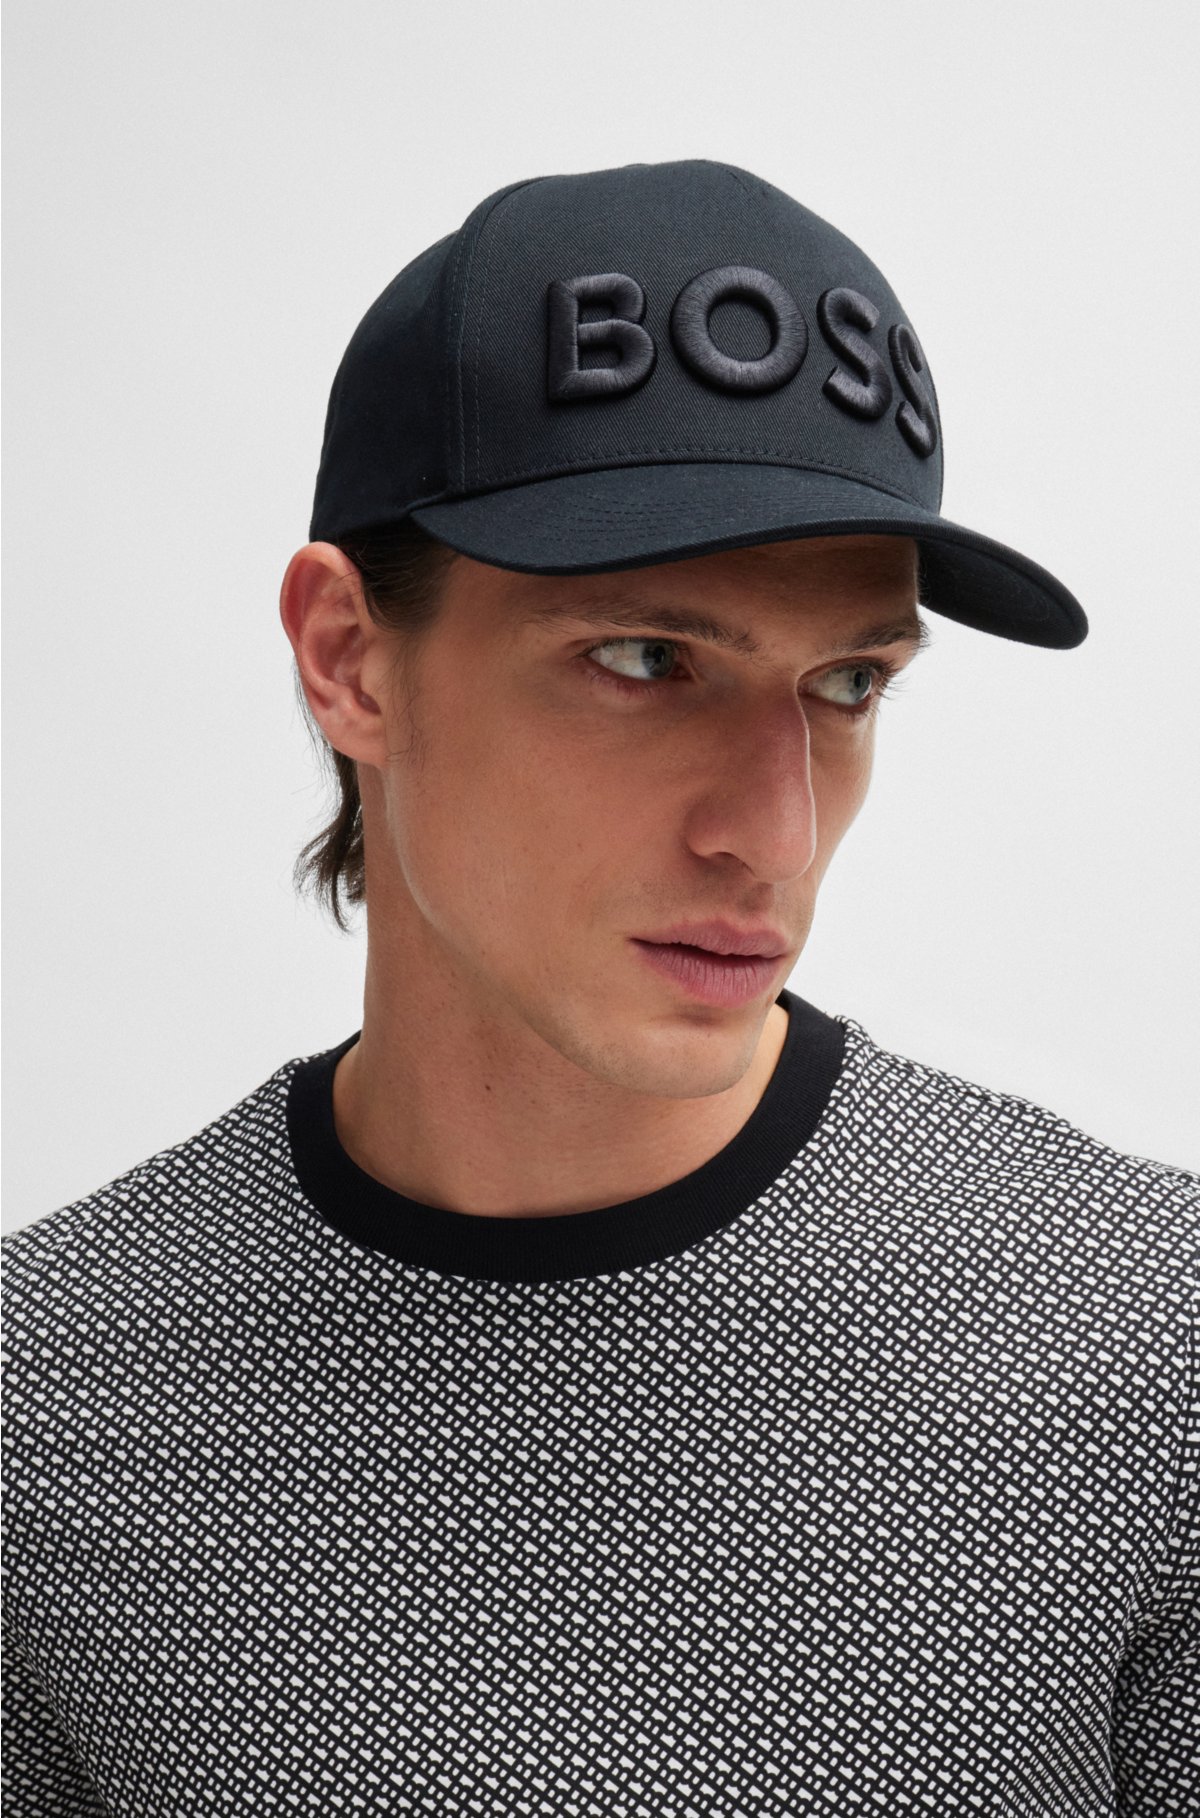 Cotton-twill cap with 3D embroidered logo, Black